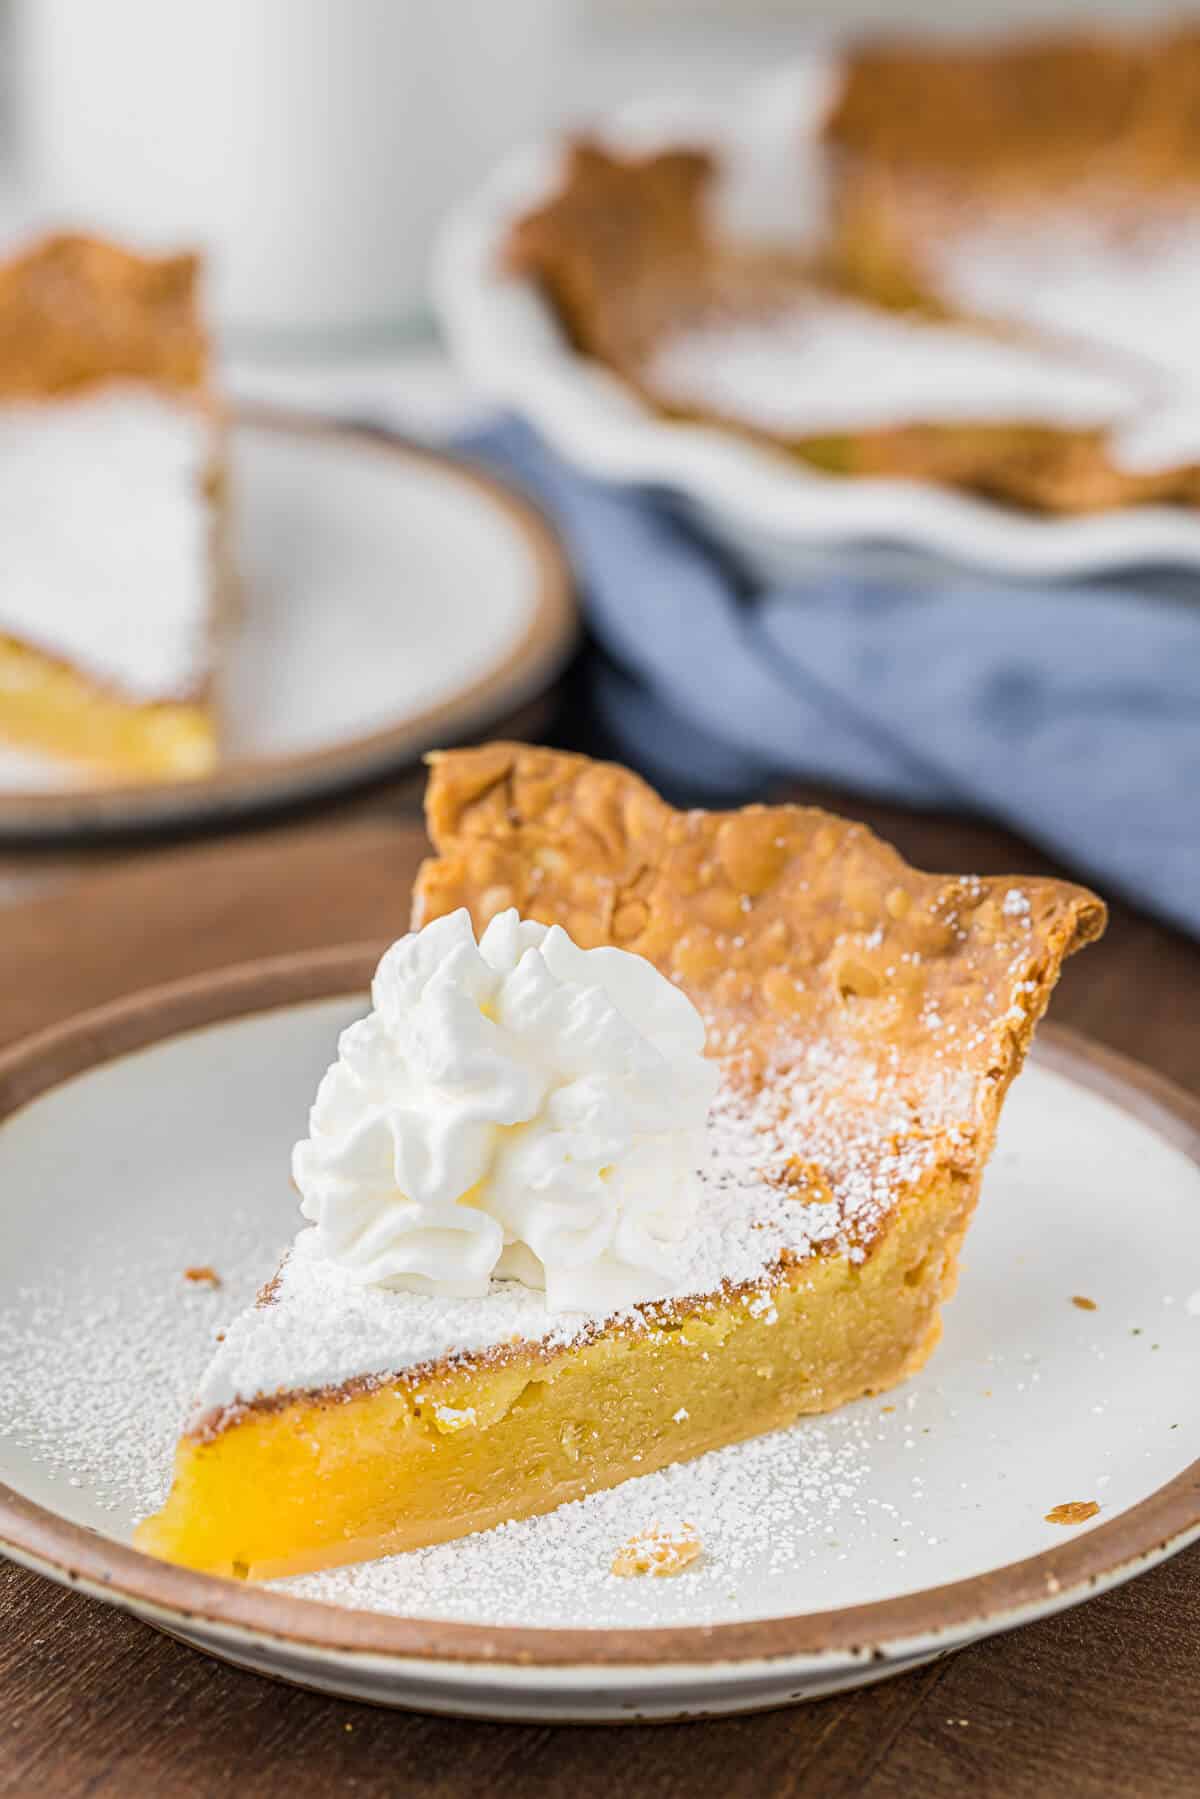 A slice of chess pie topped with whipped cream on a plate.